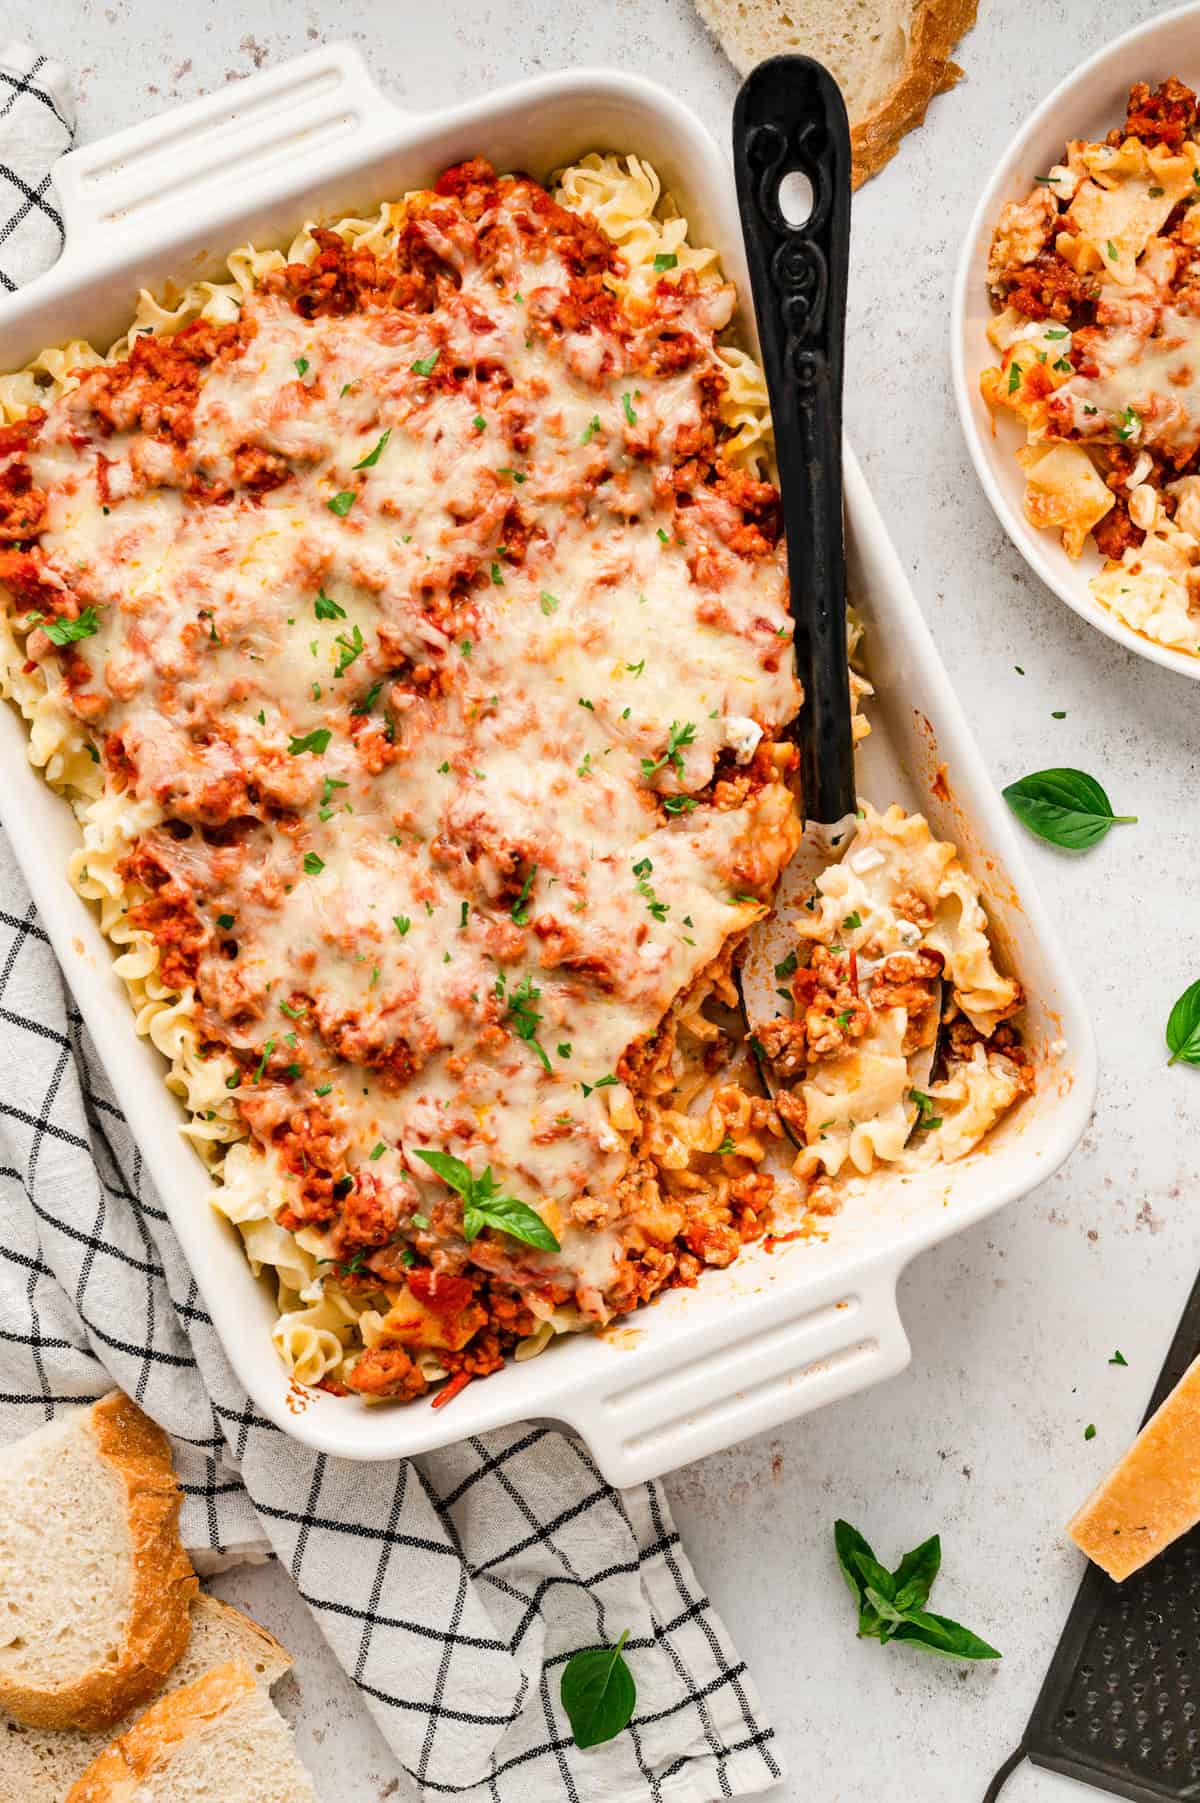 Lasagna Casserole hot out of the oven in a baking dish with serving spoon